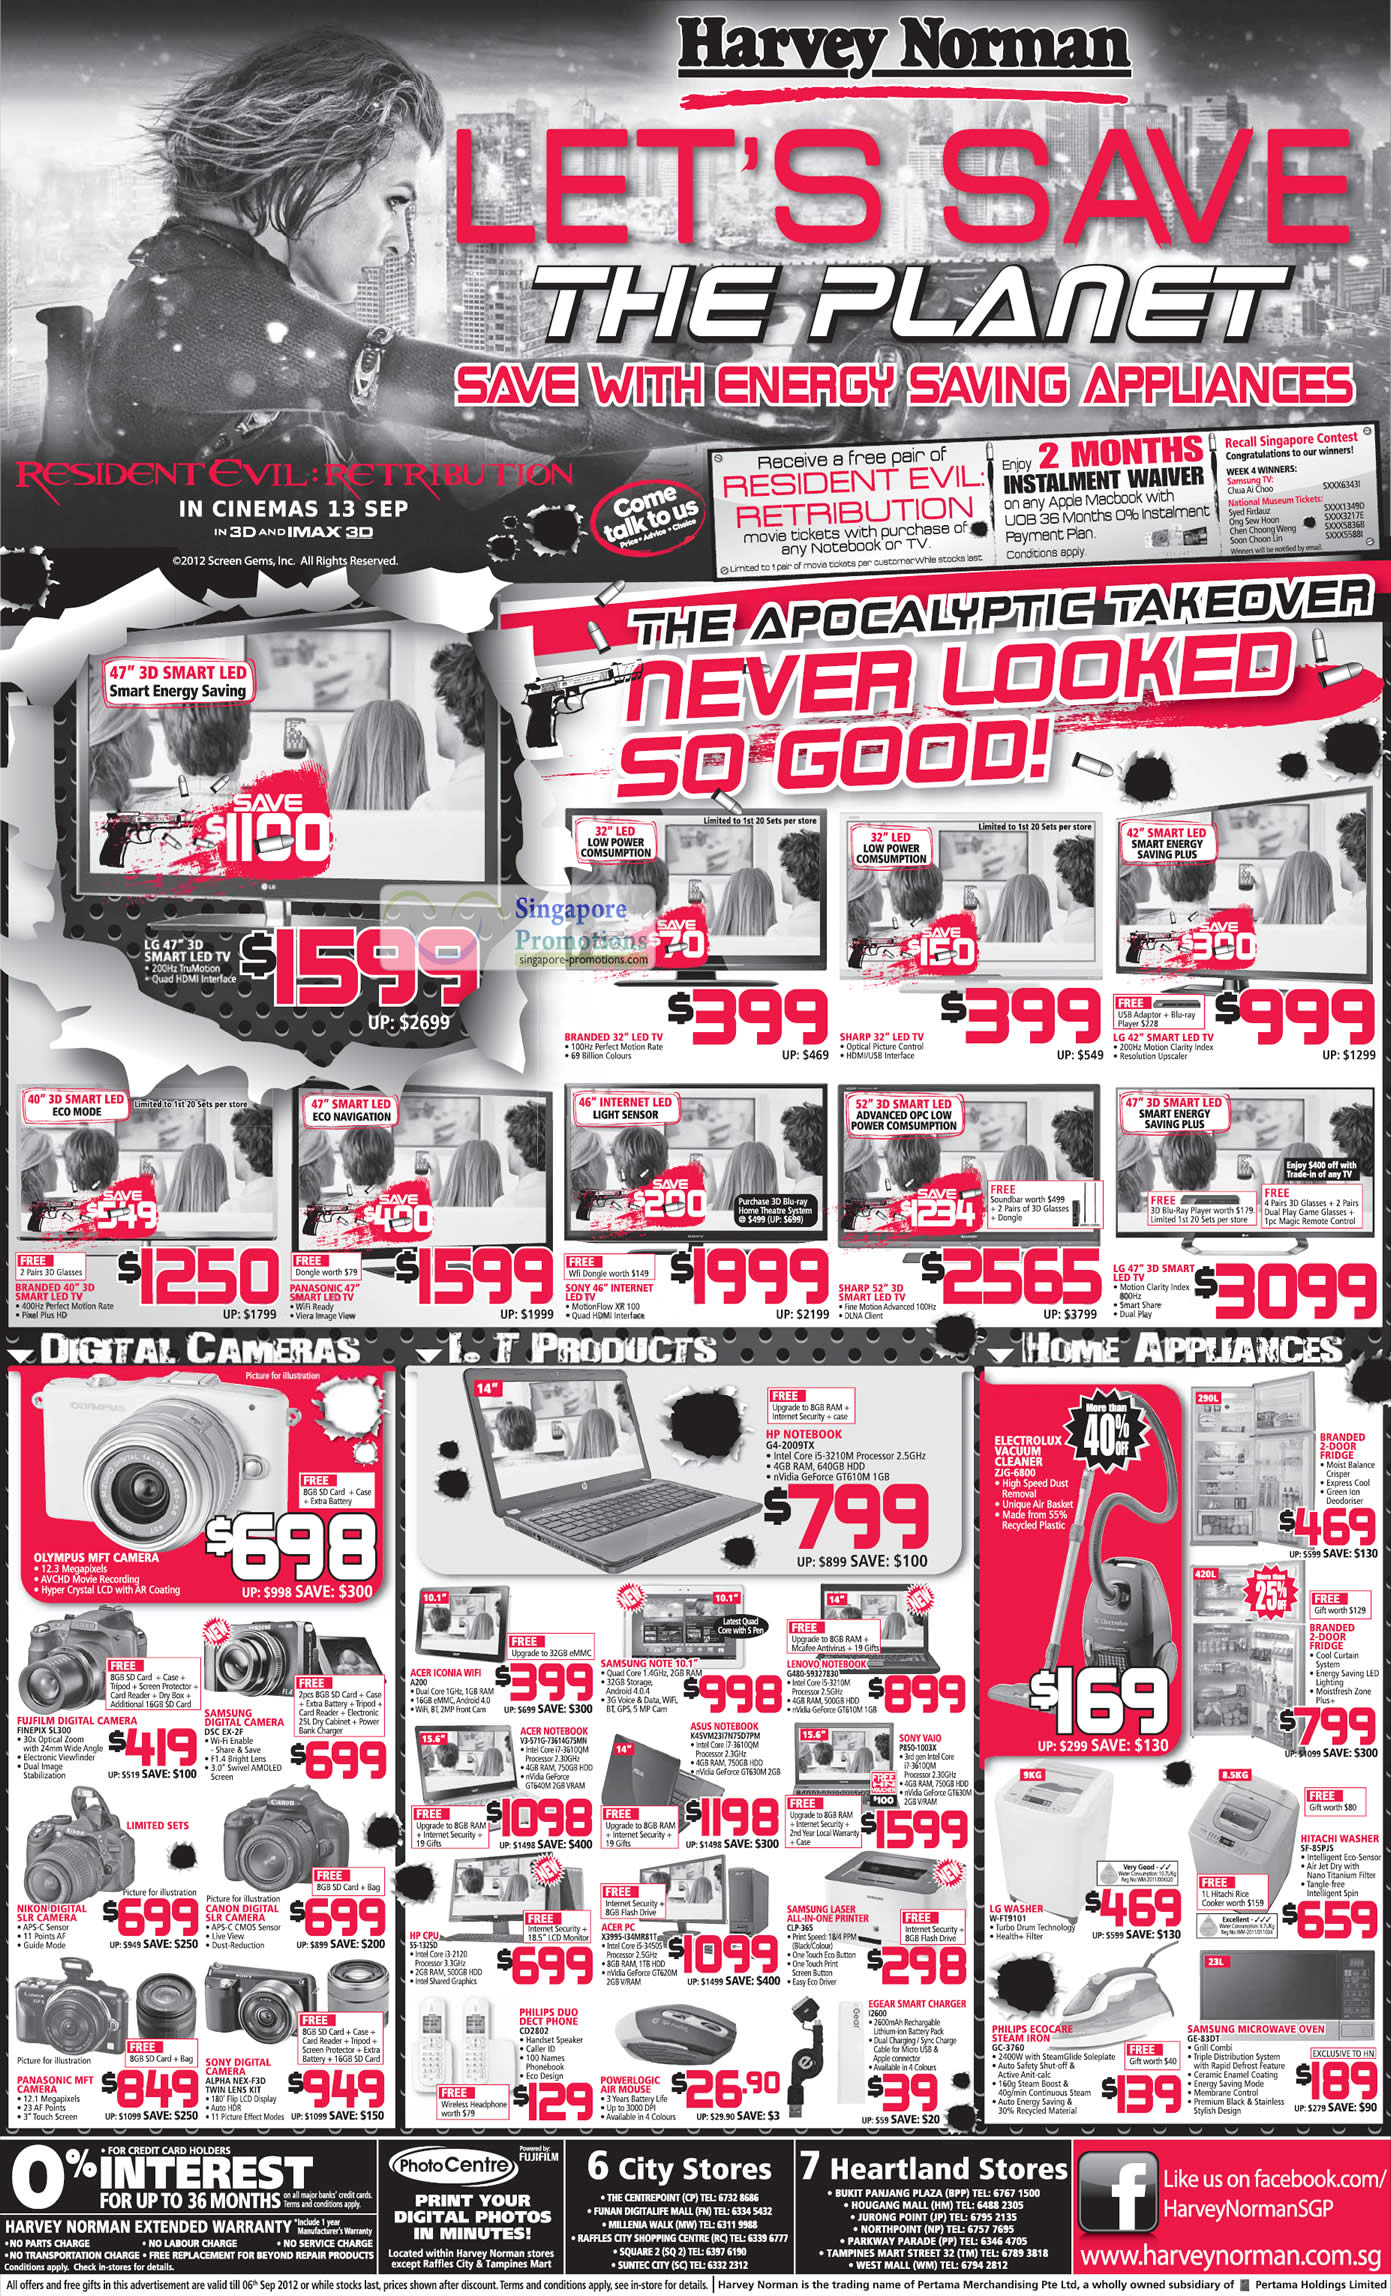 Featured image for Harvey Norman Digital Cameras, Furniture, Notebooks & Appliances Offers 1 - 7 Sep 2012